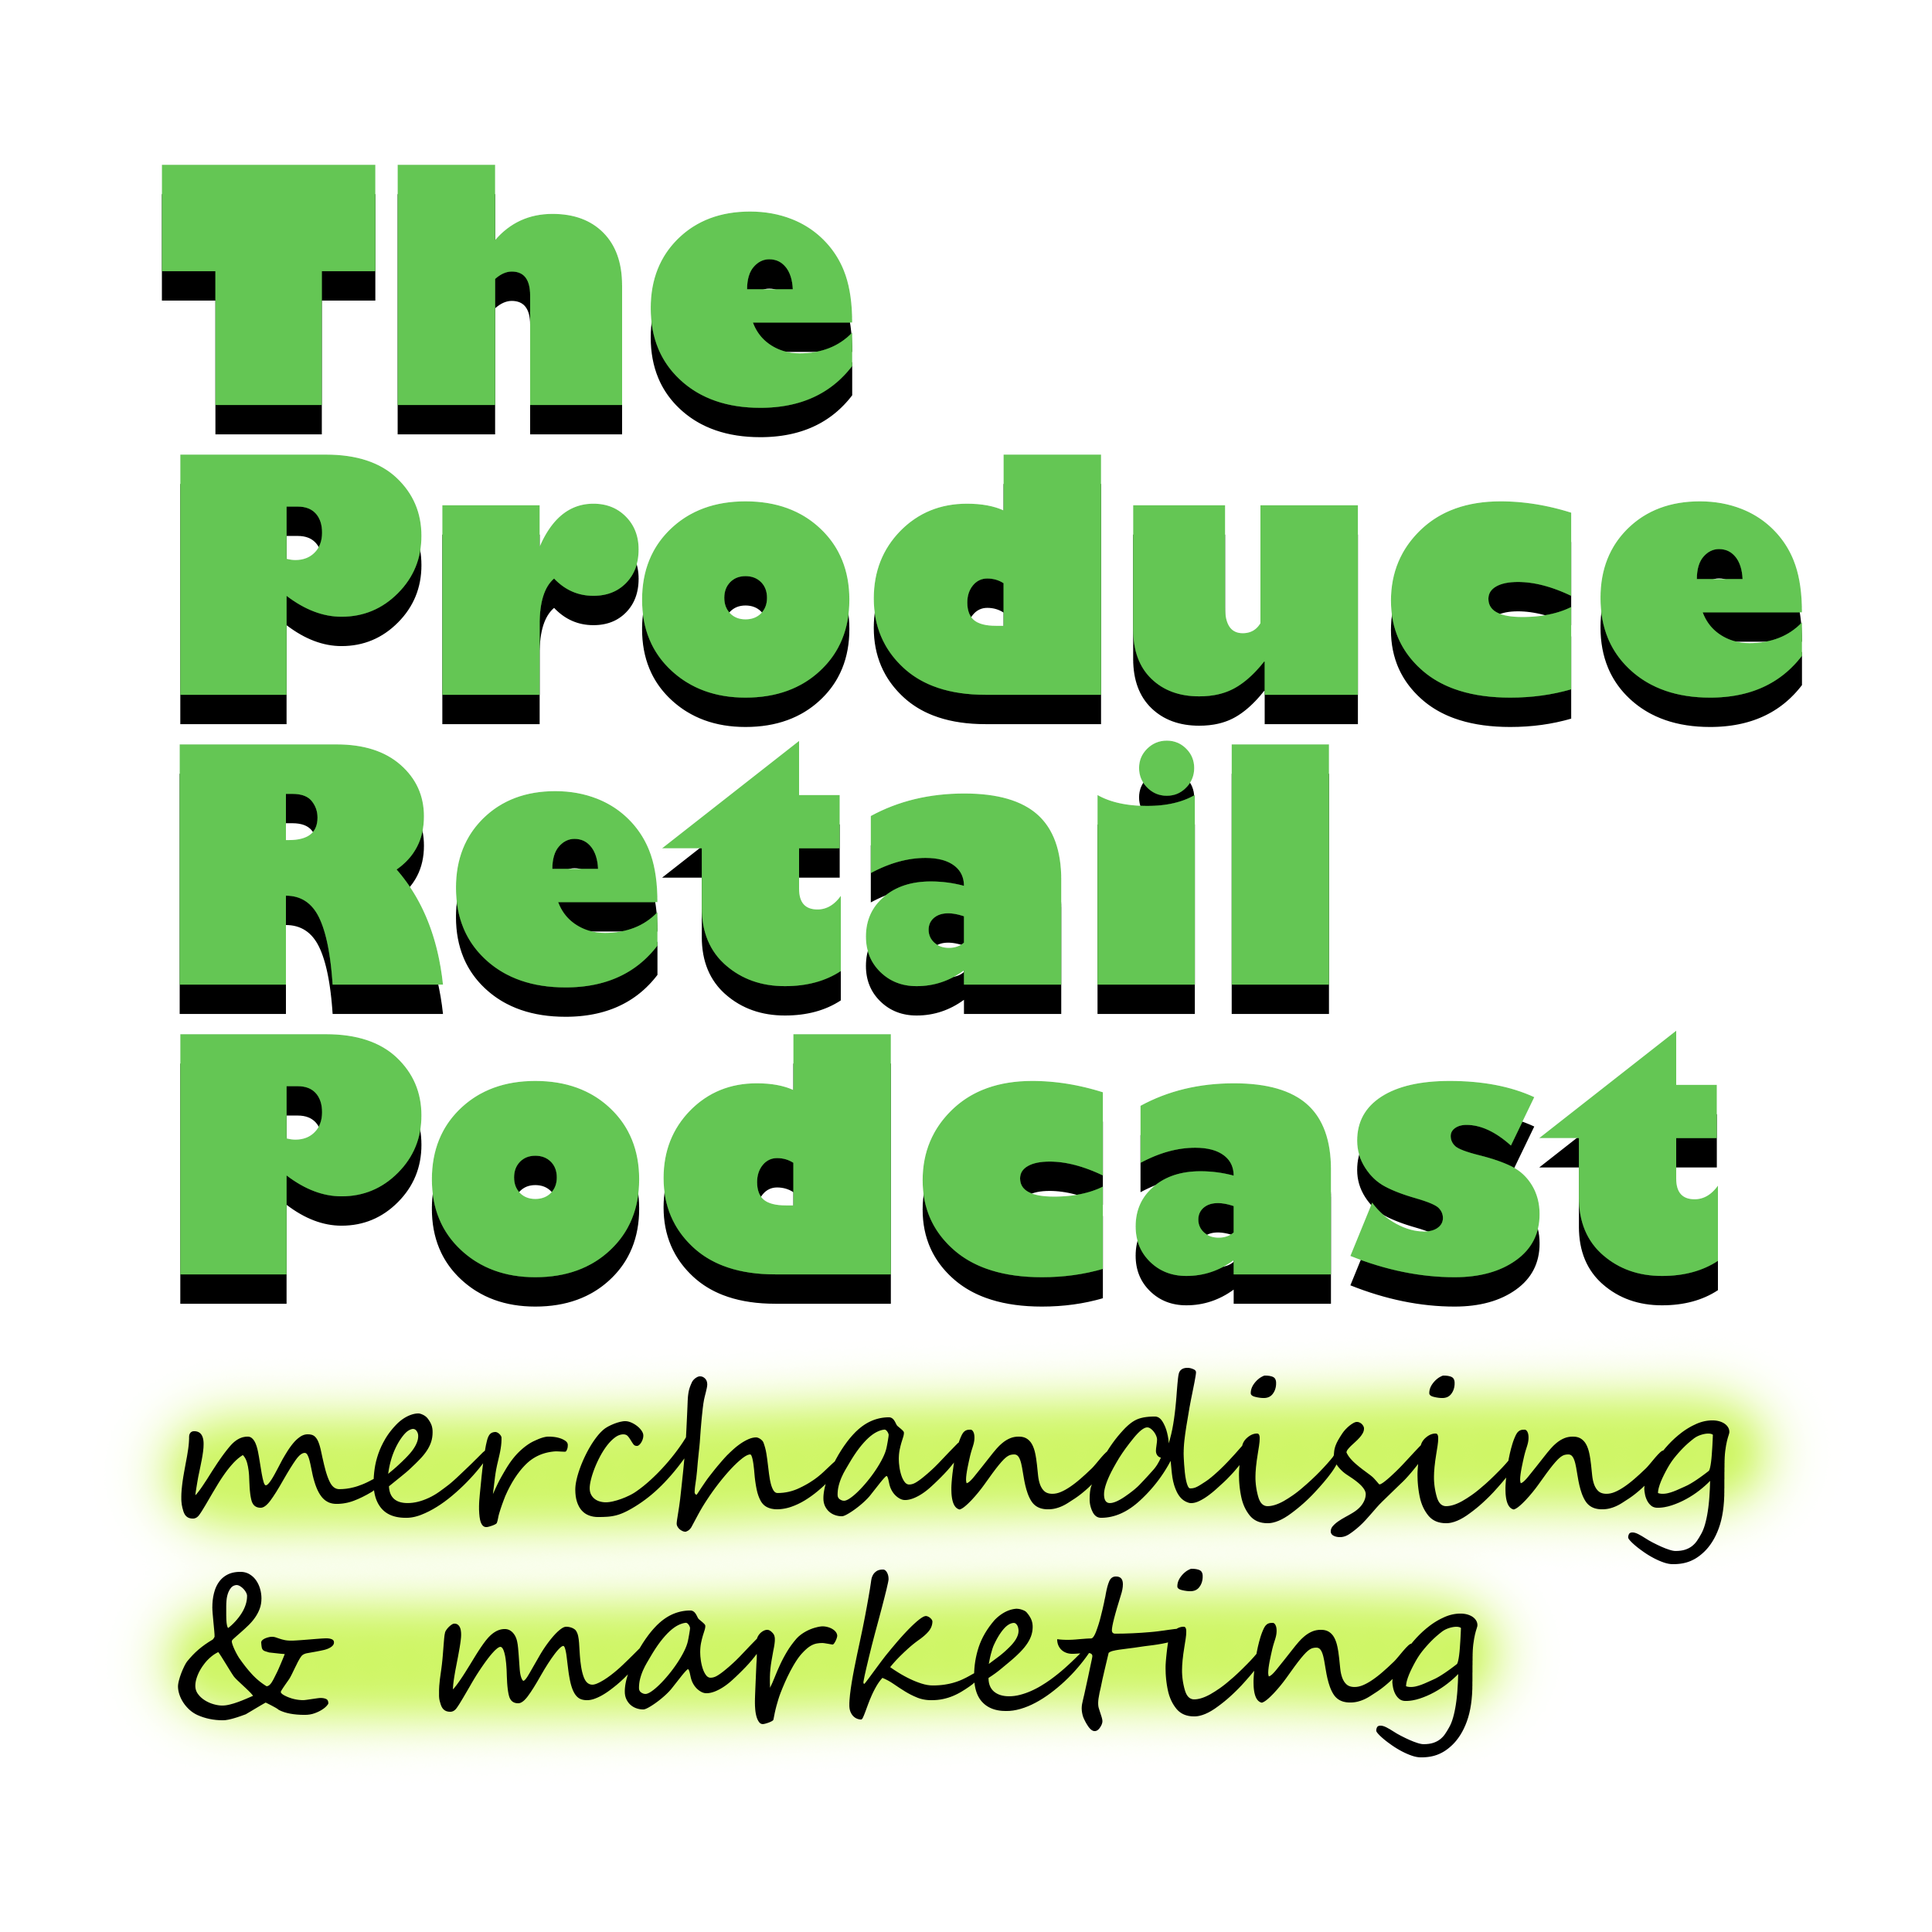 Diane Scalisi of Driscoll's, Danelle Huber of CMI Orchards and Ashley Pigo of RPE talk omnichannel marketing and the rise of retail media networks